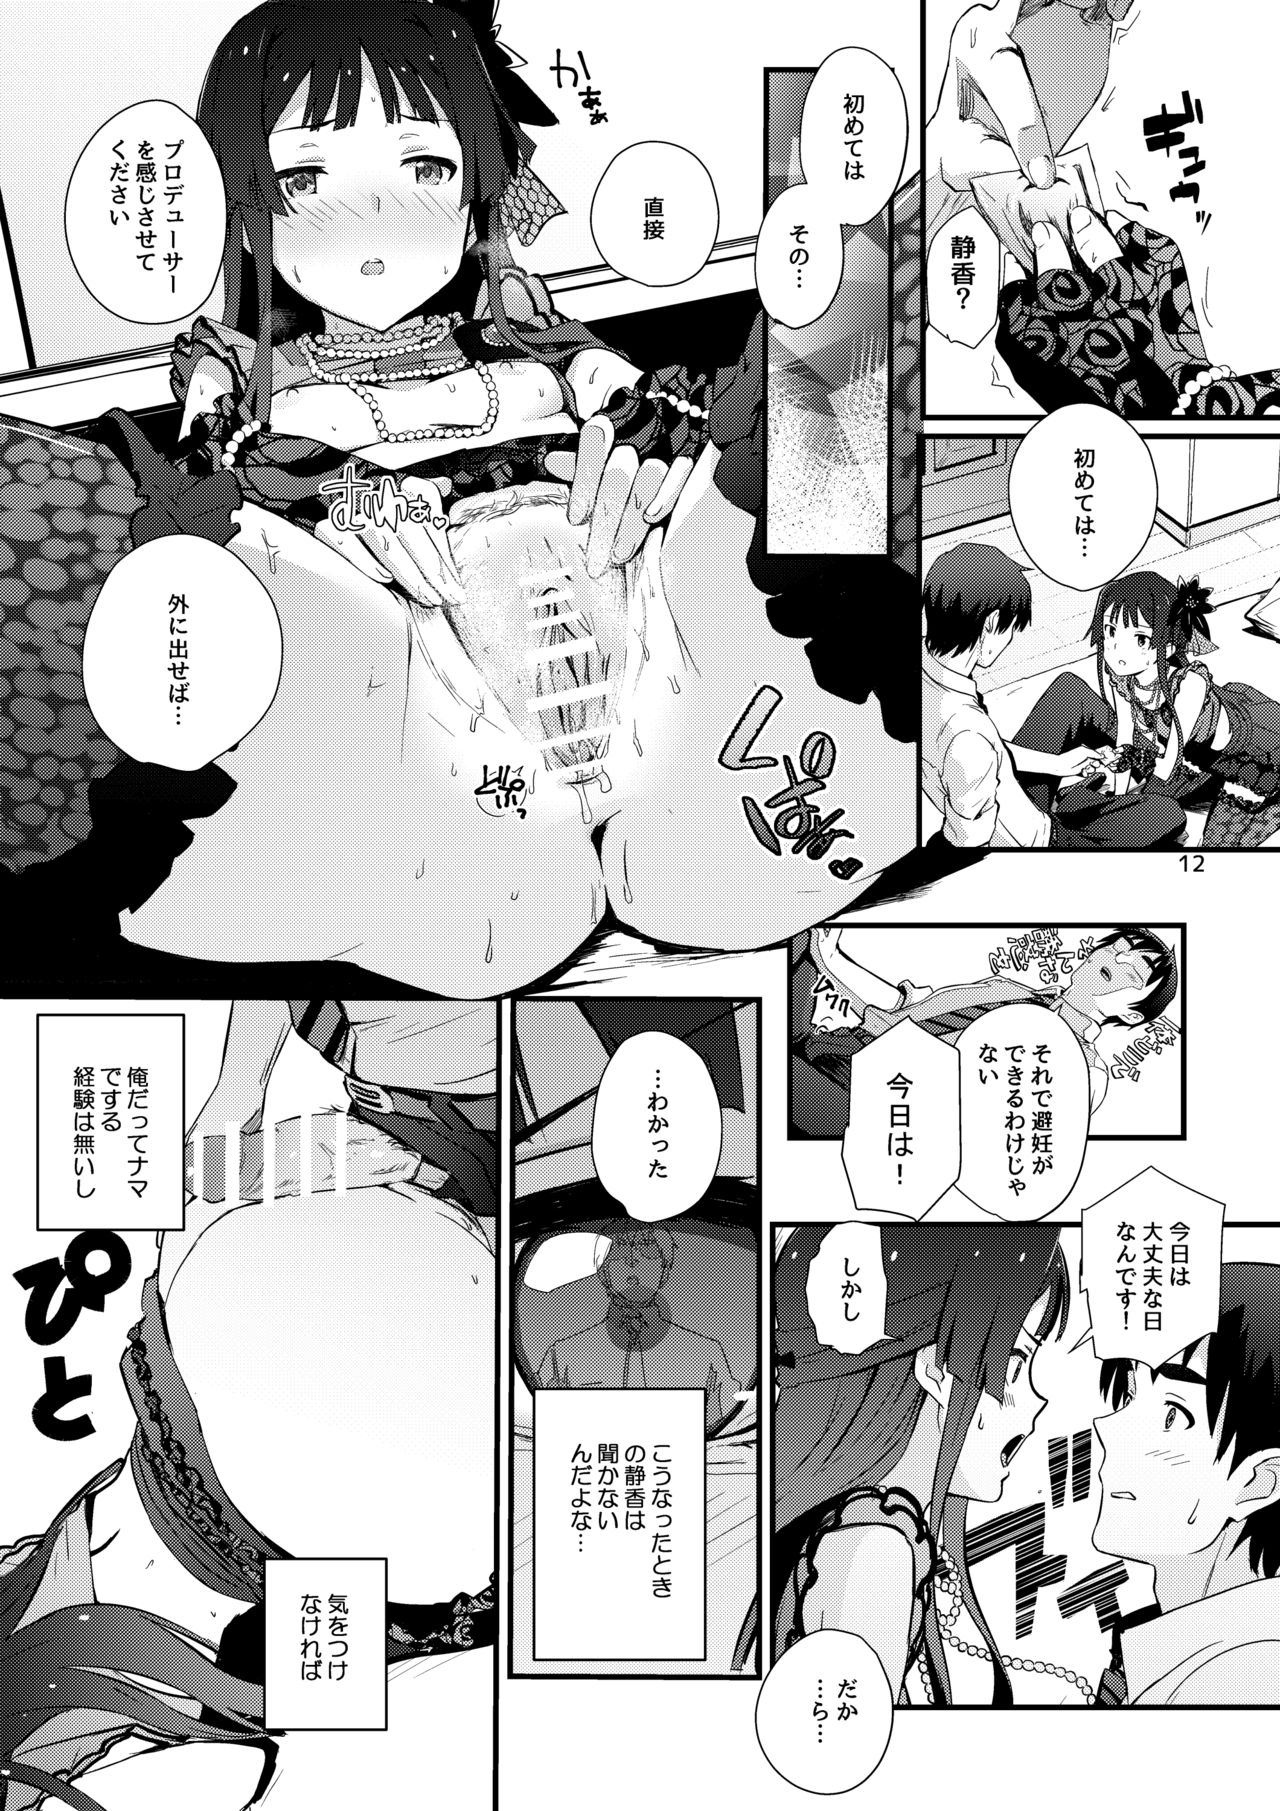 [Abstract limit (CL)] kodona cross mote (THE IDOLM@STER MILLION LIVE!) [Digital] page 11 full